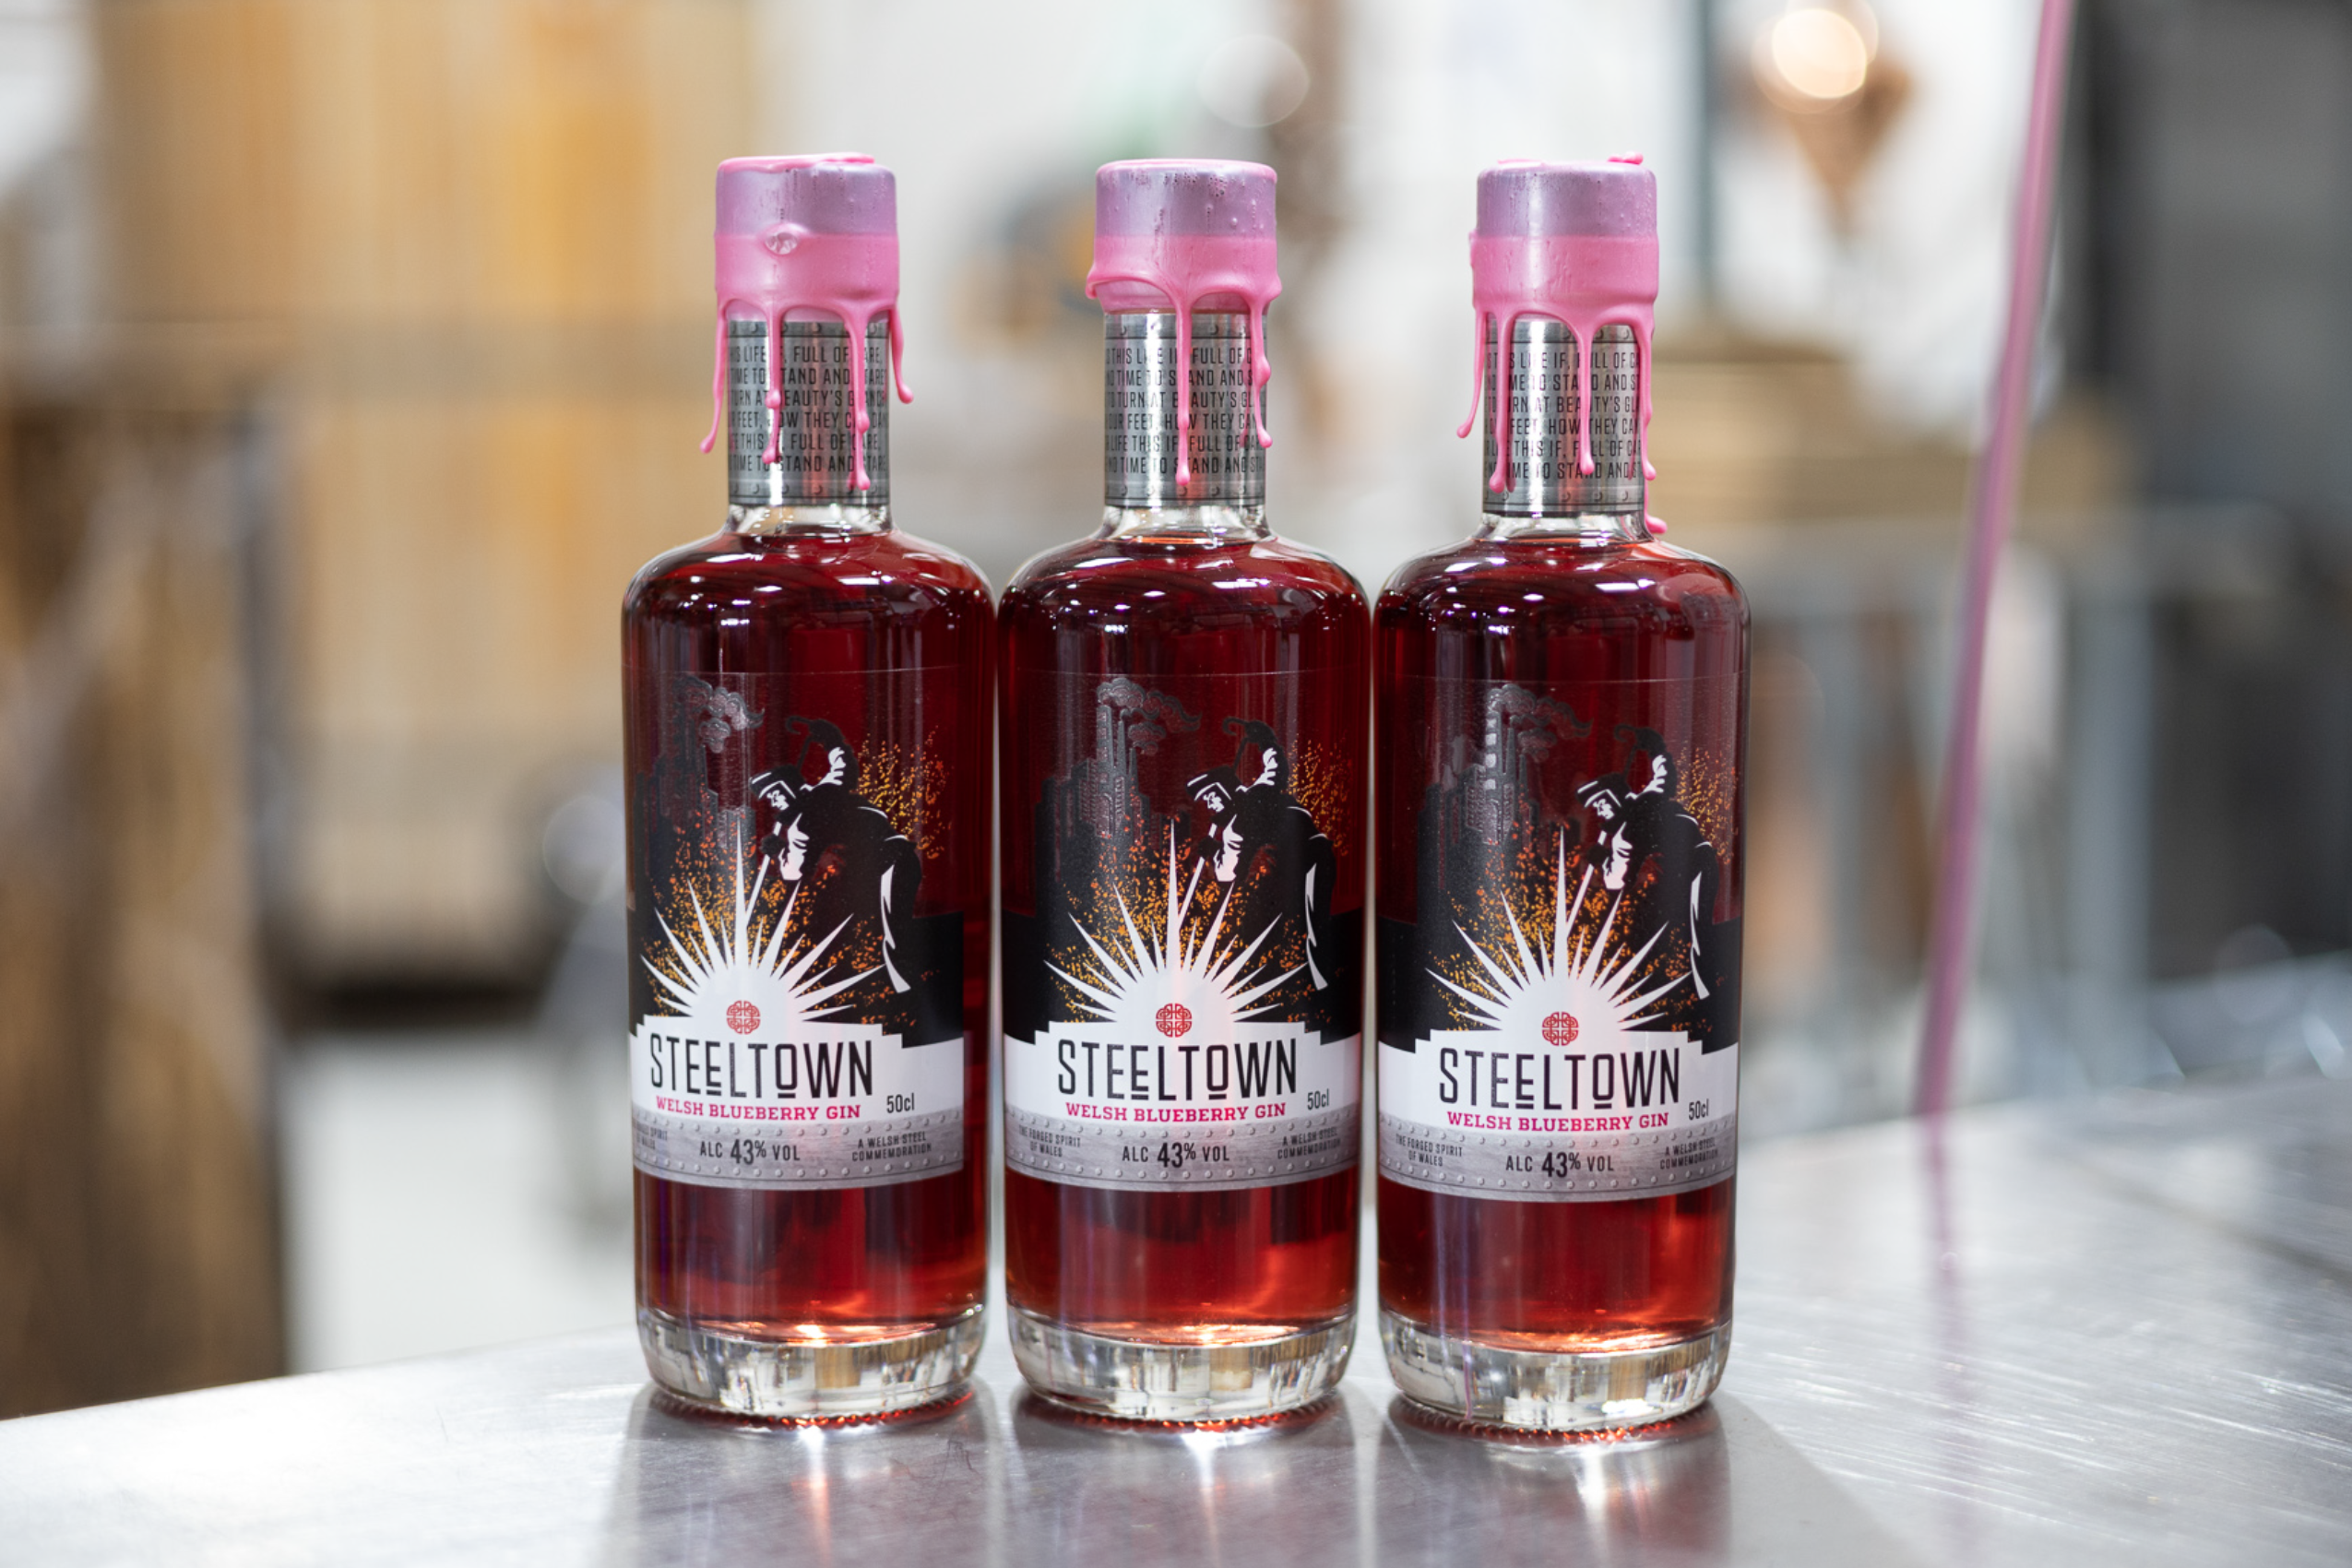 Spirit of Wales Distillery Launches Steeltown Blueberry Welsh Gin